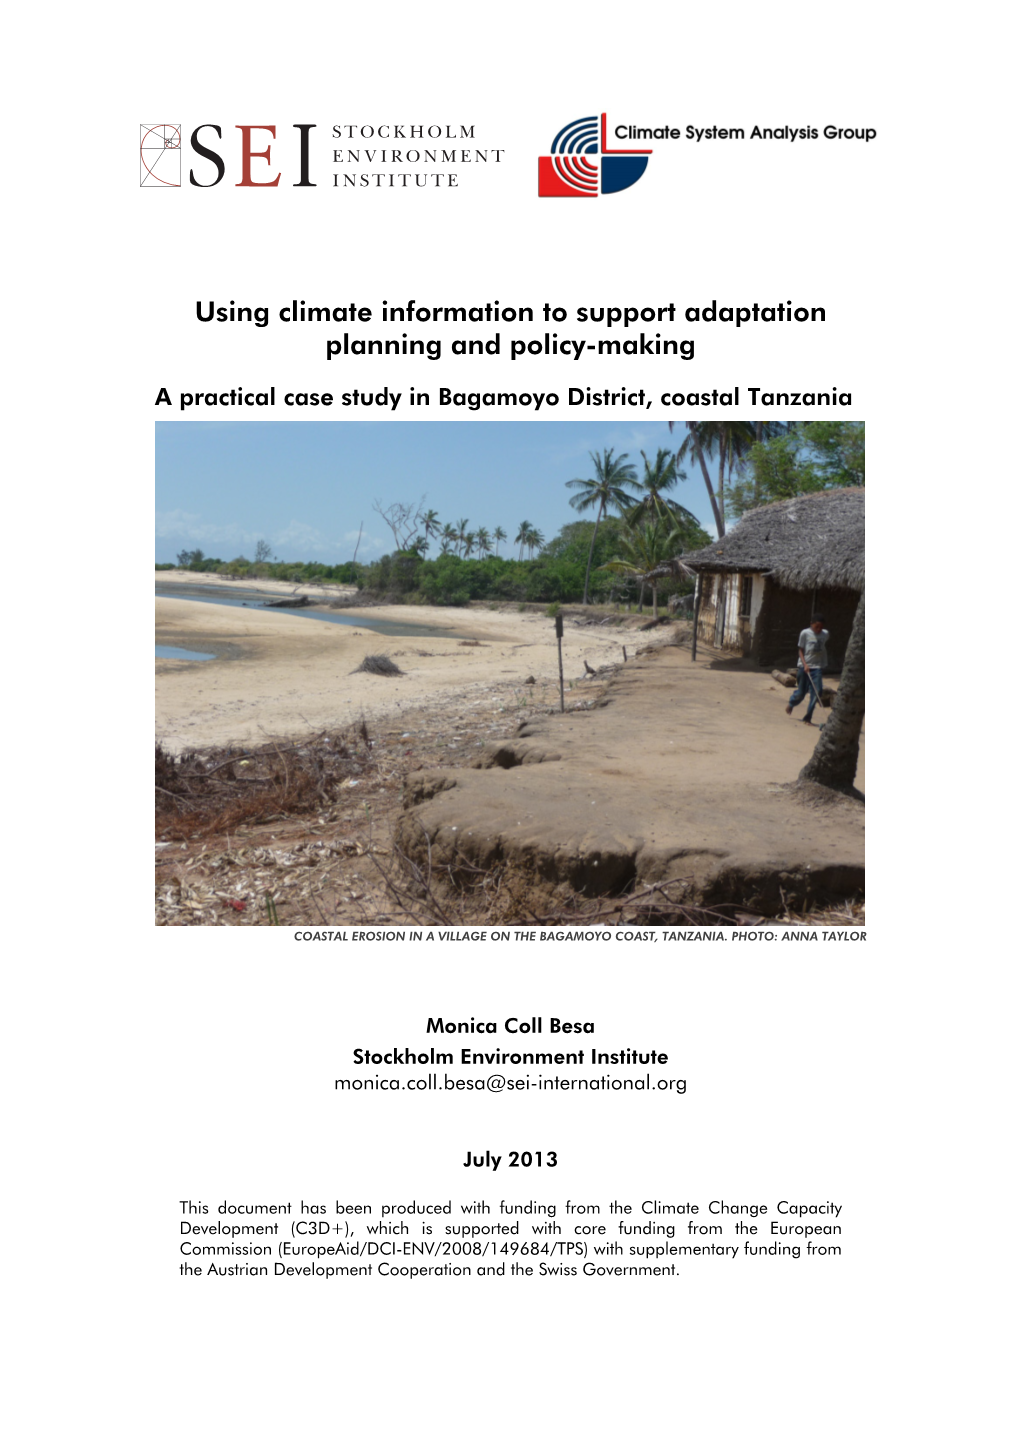 Using Climate Information to Support Adaptation Planning and Policy-Making